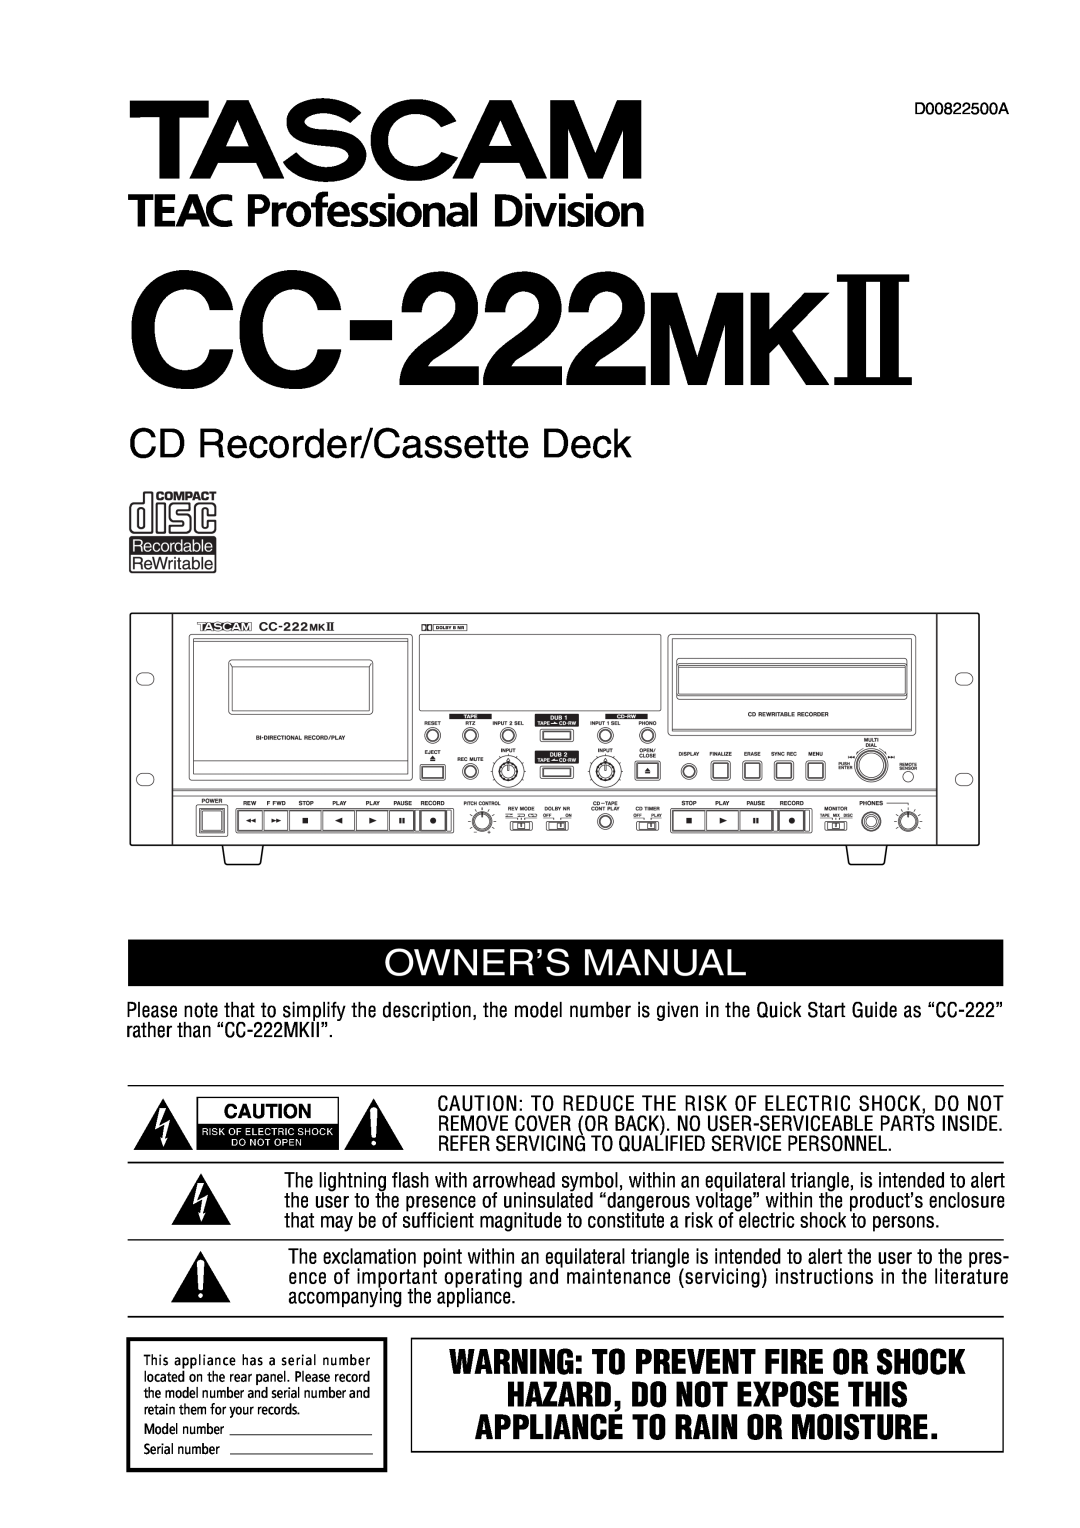 Tascam CC-222MKII owner manual CD Recorder/Cassette Deck, Hazard, Do Not Expose This, Appliance To Rain Or Moisture 